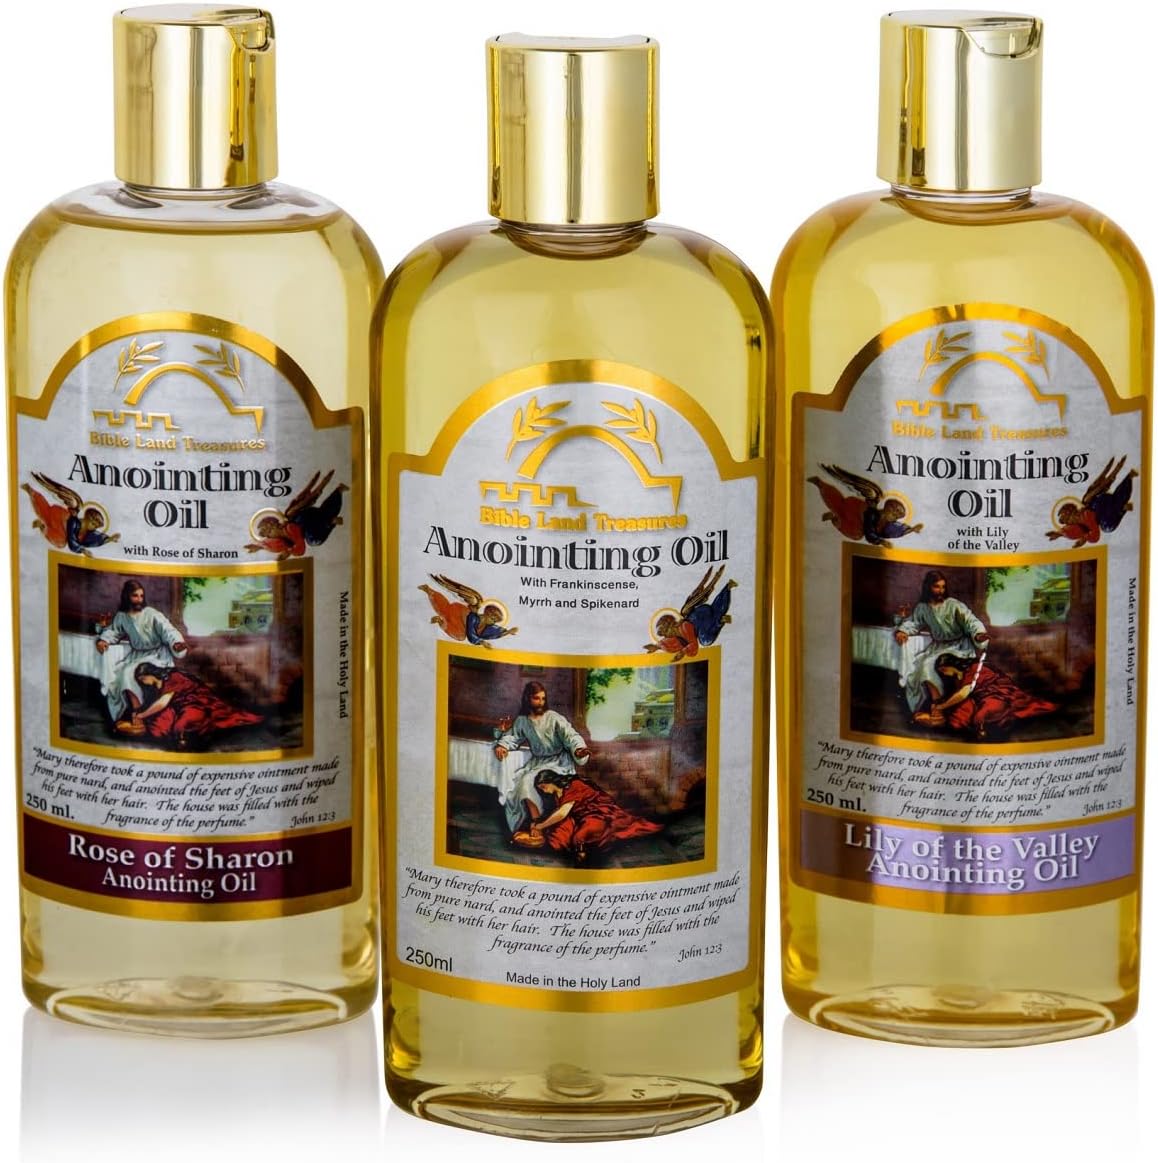 3 Bottle Set of Holy Land Treasures Anointing Oils,  with Lily of The Valleys, Rose of Sharon, Frankincense, Myrrh, and Spikenard, 8.45 fl. oz | 250 ml